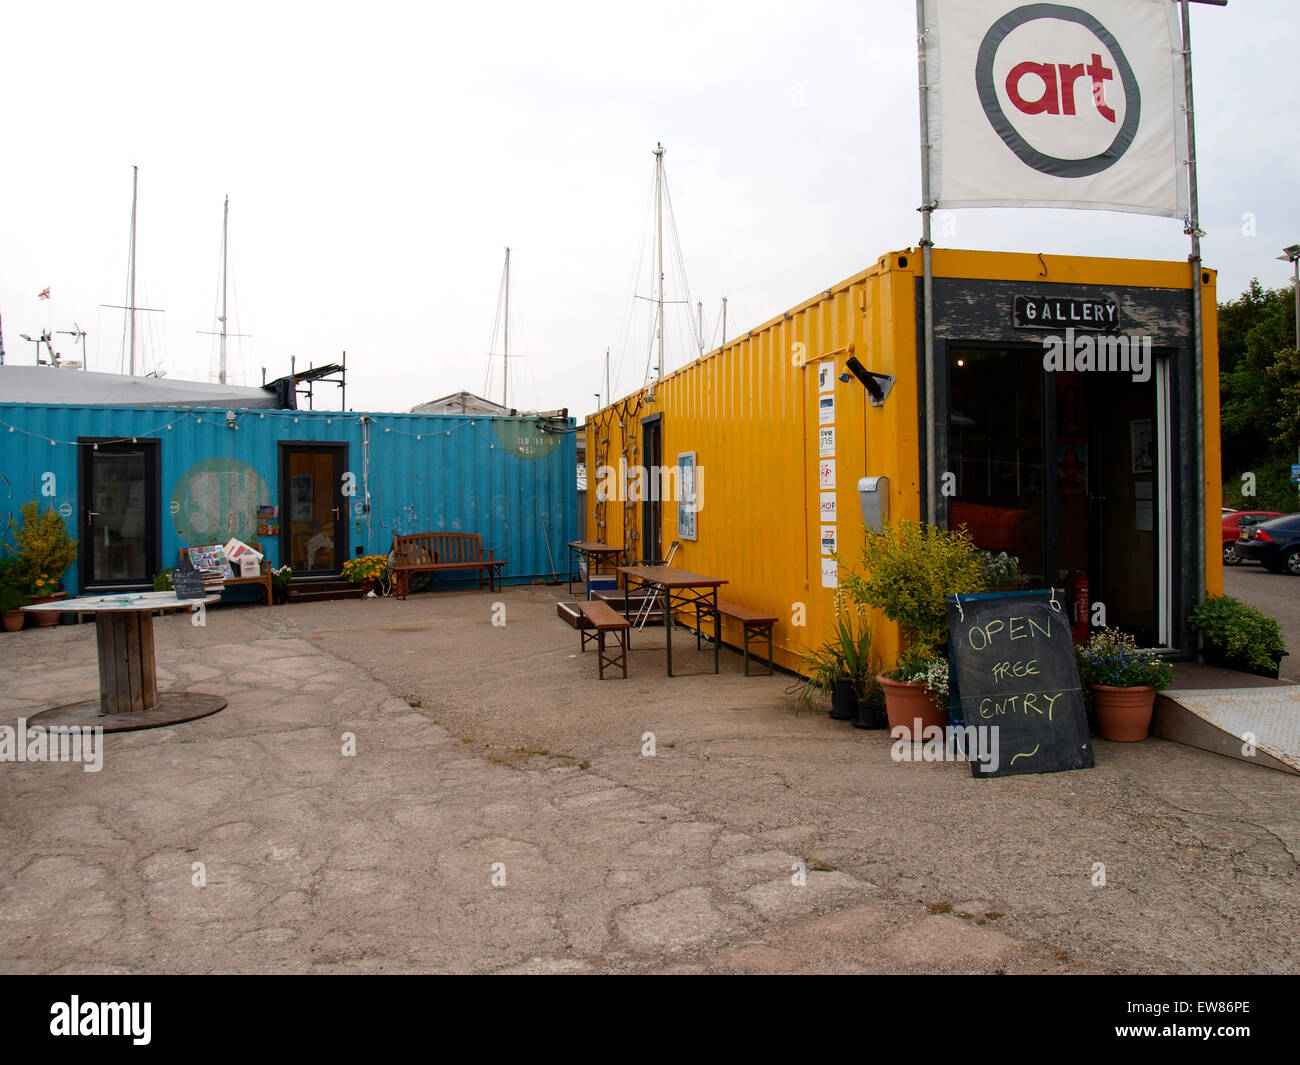 Contains Art is 3 shipping containers providing artists' studios and gallery space at Watchet Harbour, Somerset, UK Stock Photo